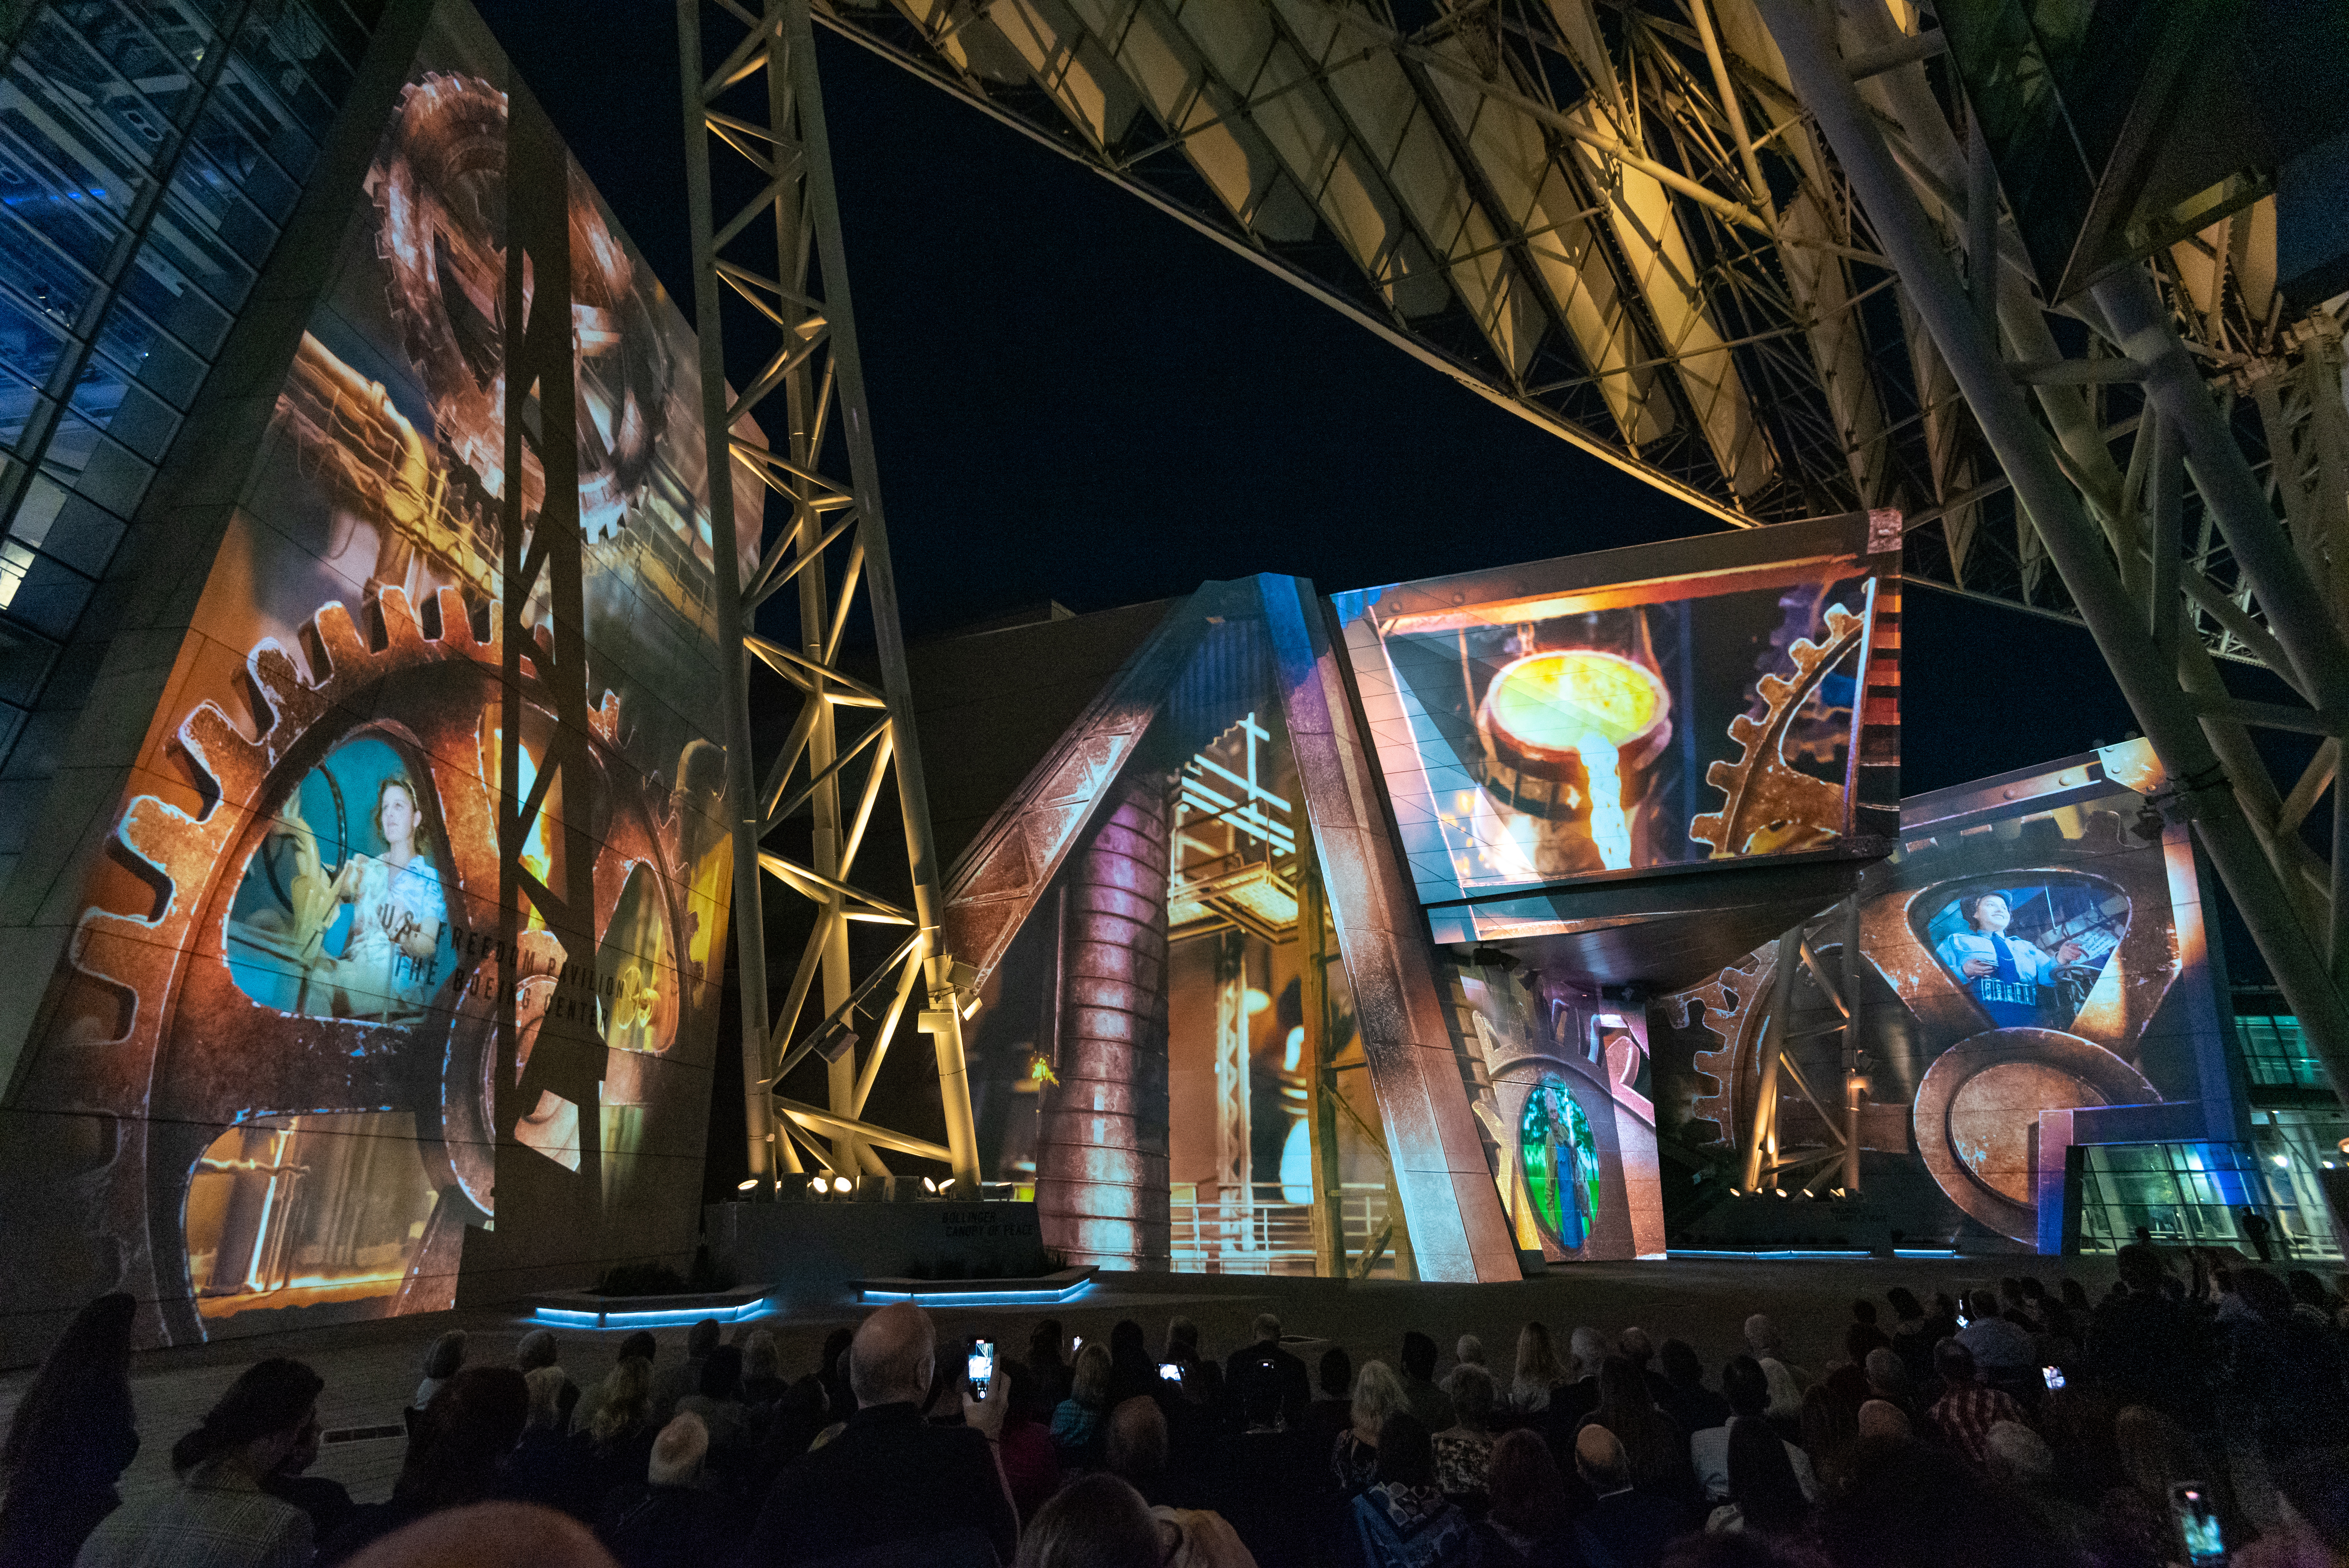 Shining A Light on the Dark Art of Projection Mapping